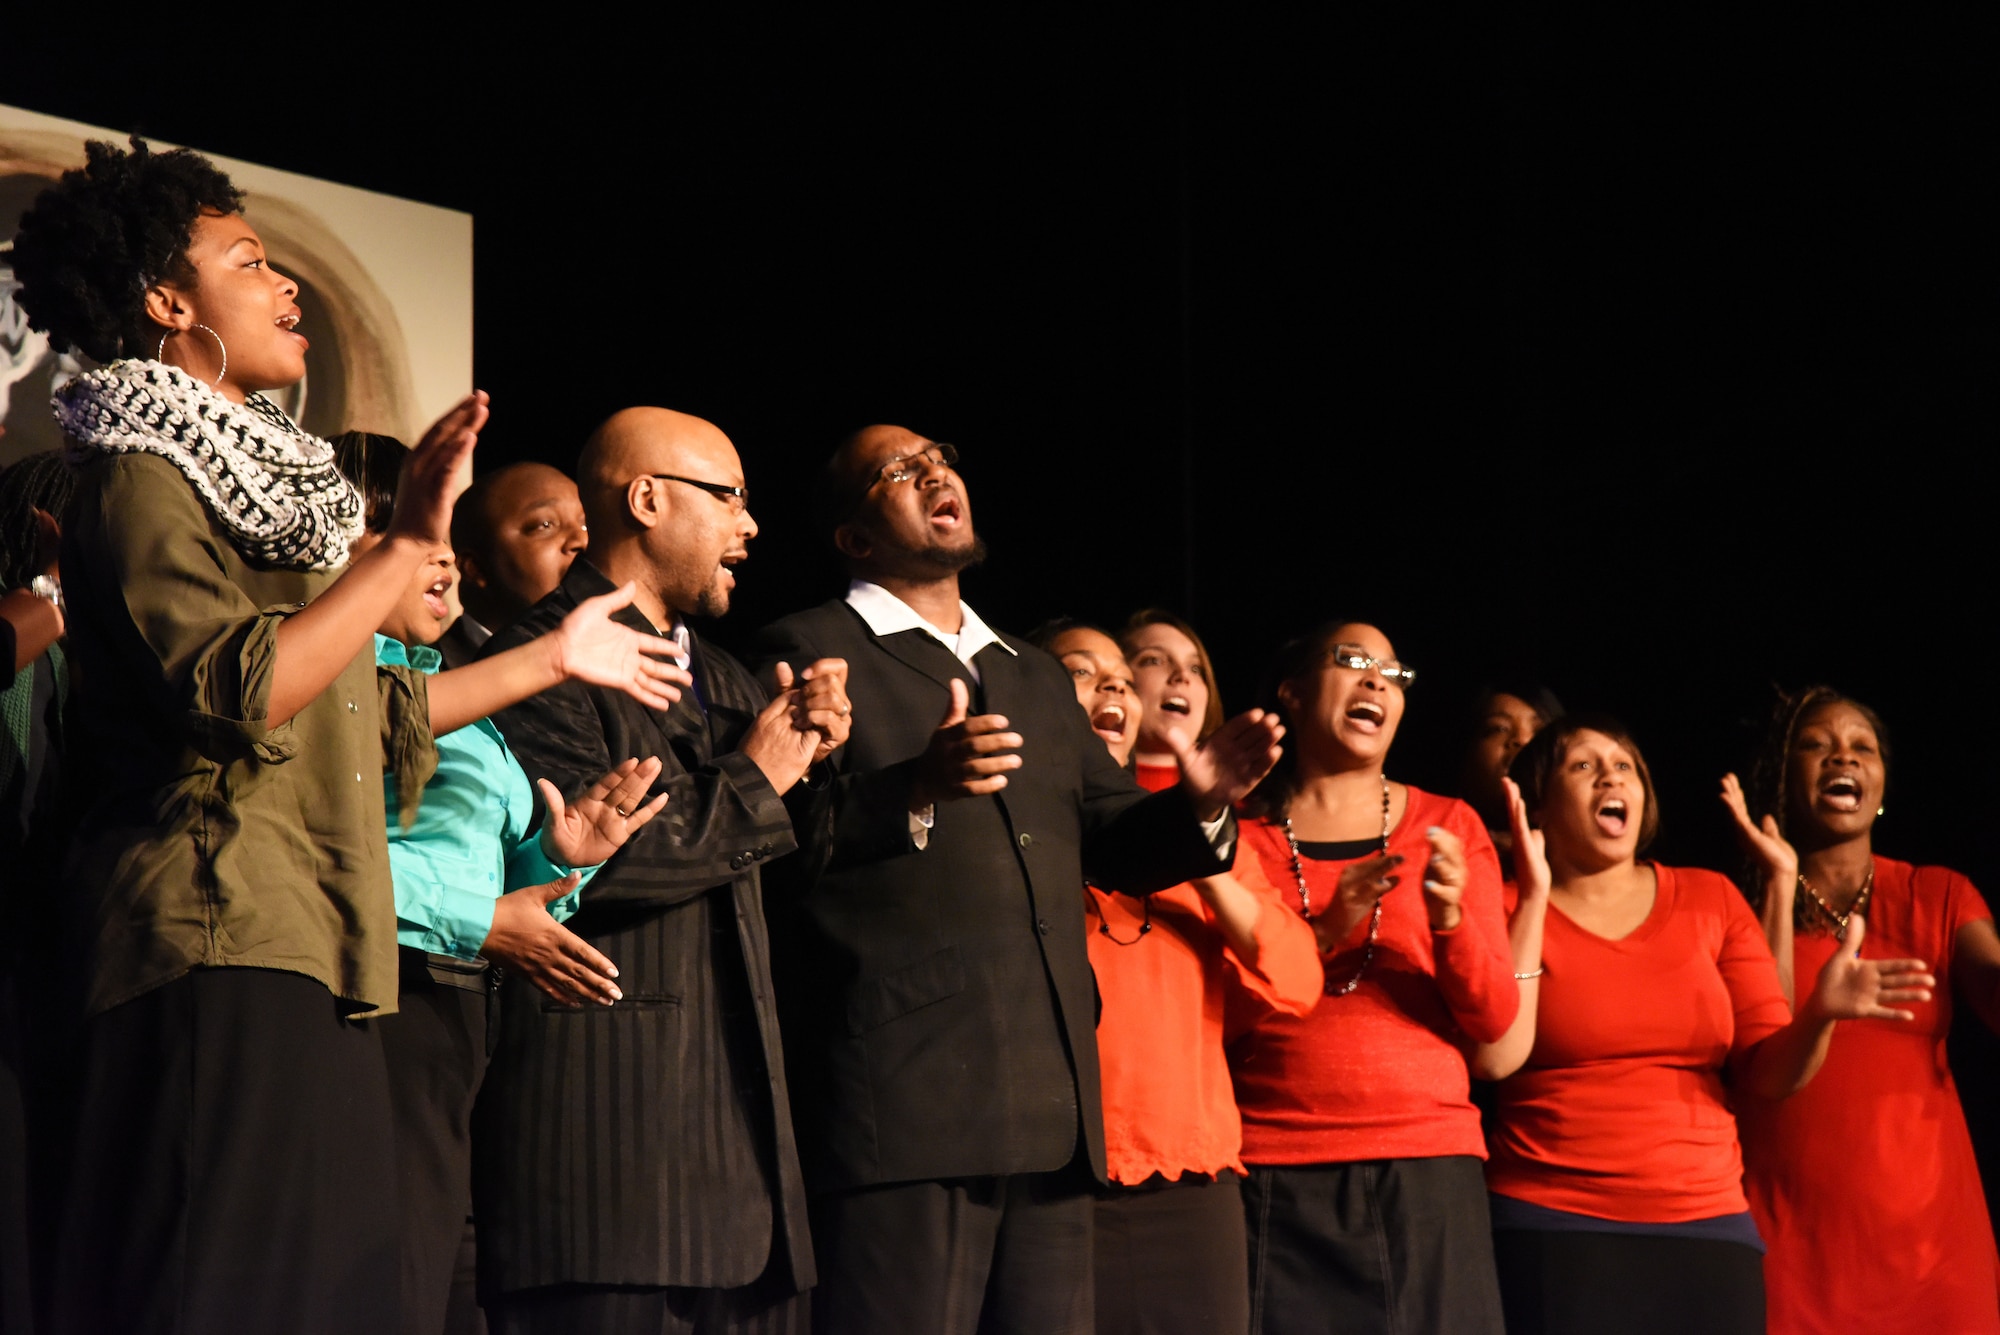 Members of the Alexander Temple Church of God Choir sing during the opening act of the University of Great Fall’s “What Kind of History Will You Leave” production Feb. 26. The production was hosted in celebration of Black History Month. (U.S. Air Force photo/Airman 1st Class Collin Schmidt)  